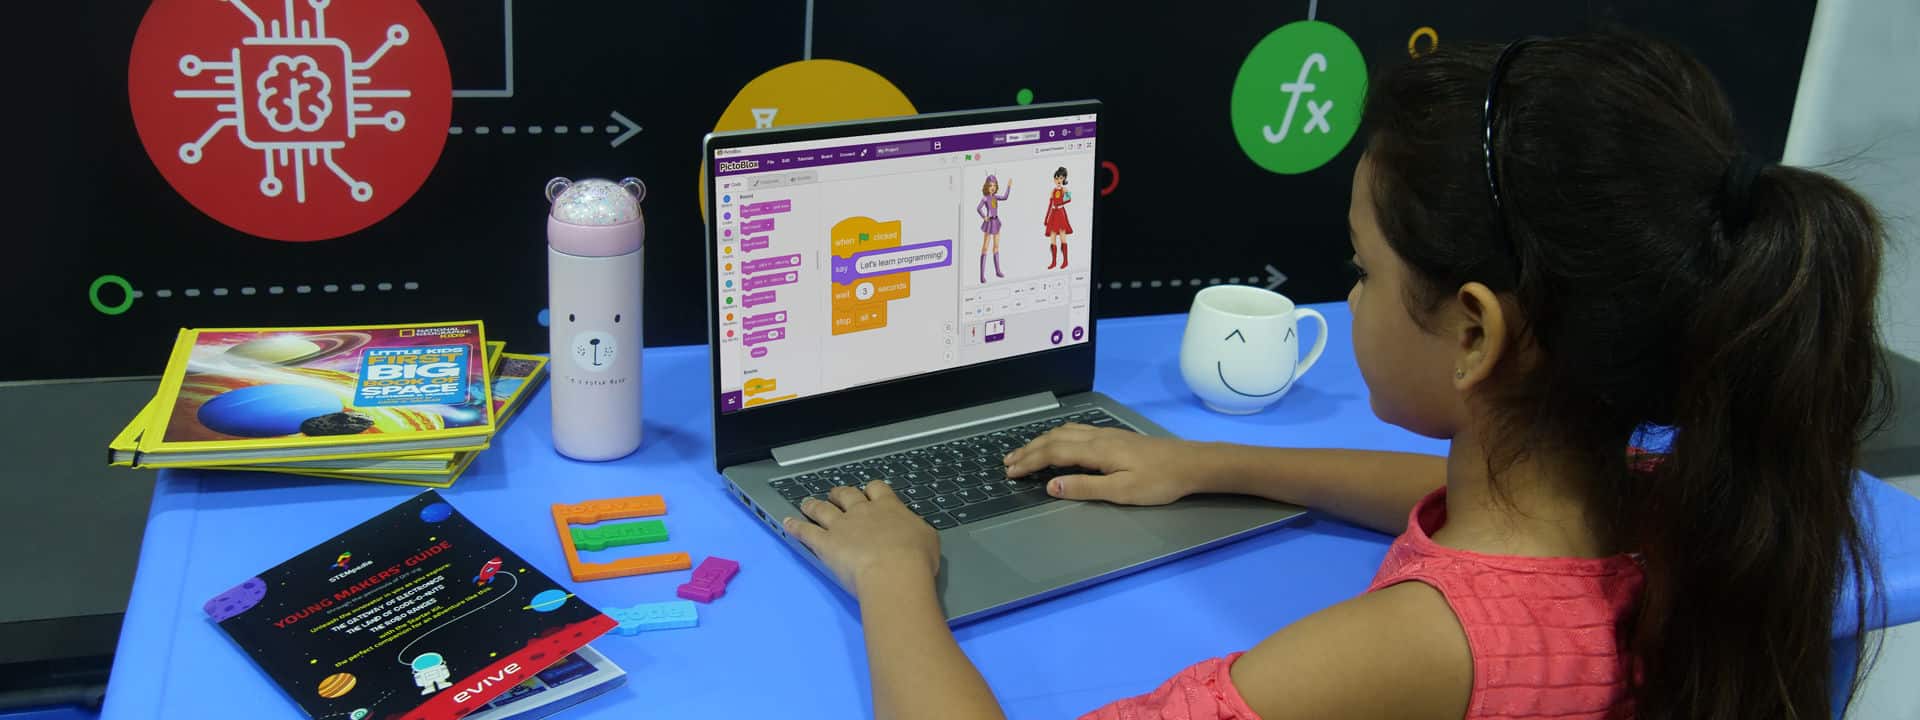 Programming Contest for Girls - PictoBlox